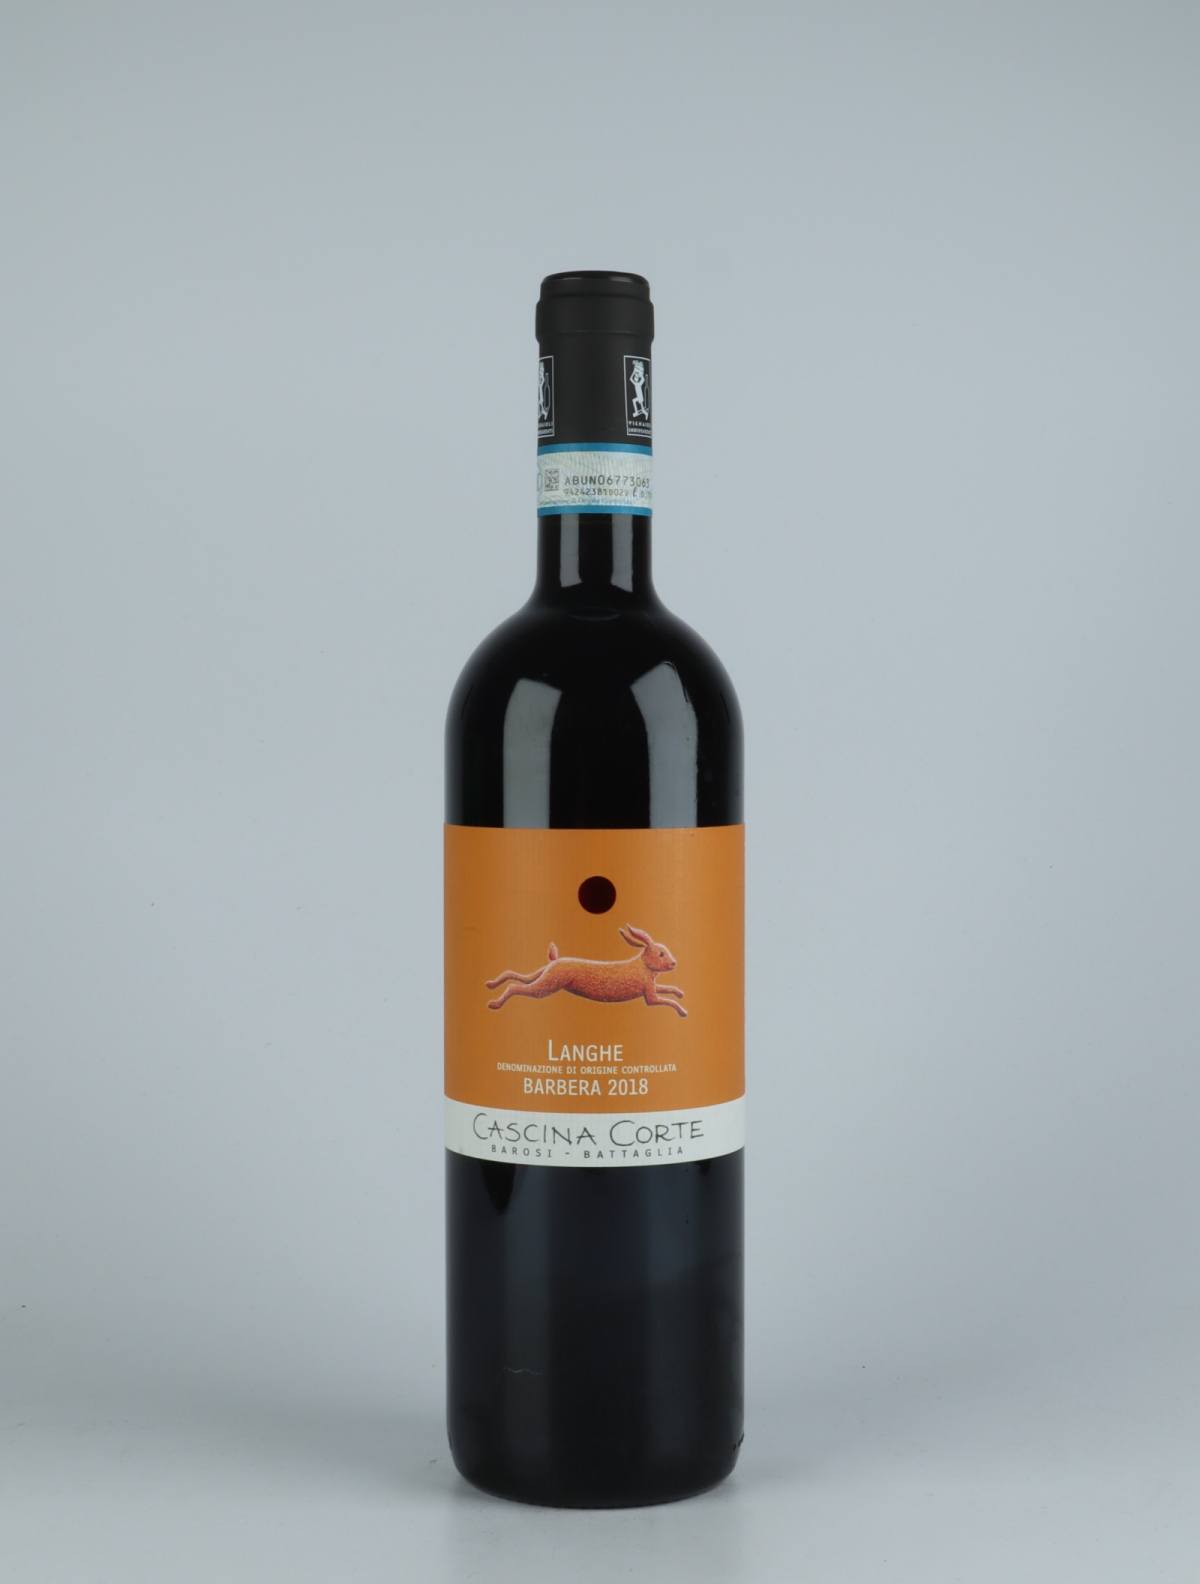 A bottle 2018 Barbera Red wine from Cascina Corte, Piedmont in Italy